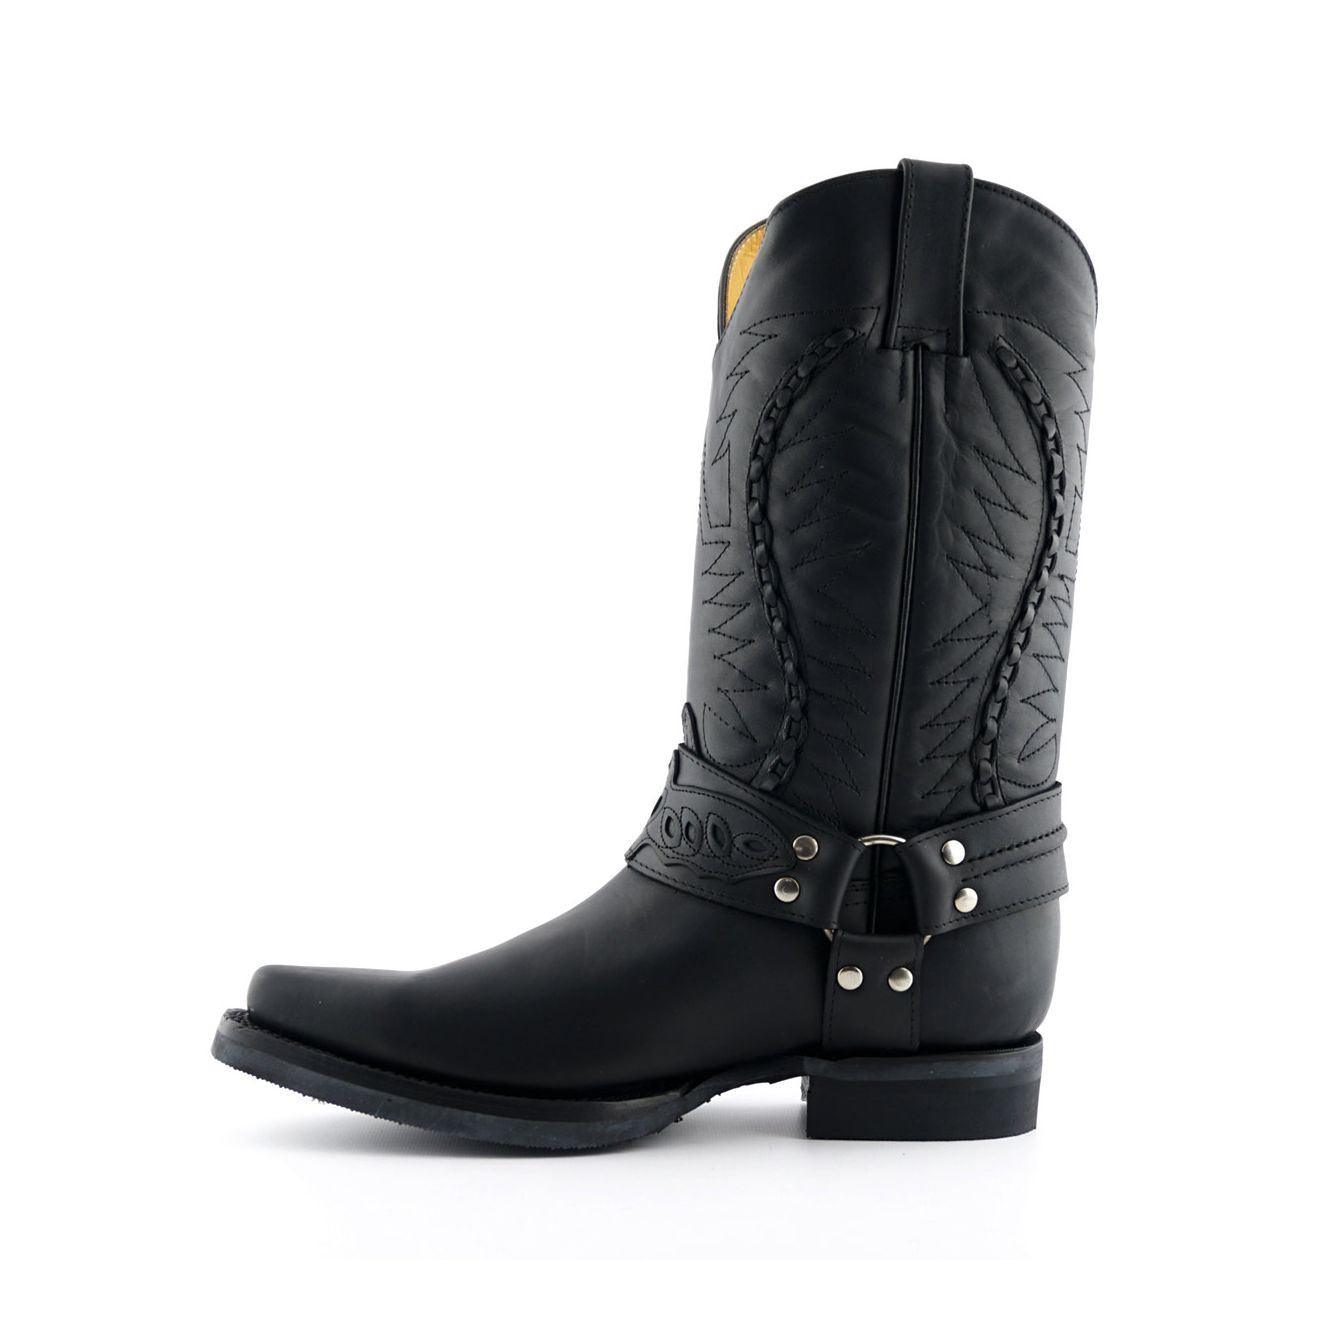 Grinders Mens Black Leather Cowboy Boot-Galveston - Upperclass Fashions 